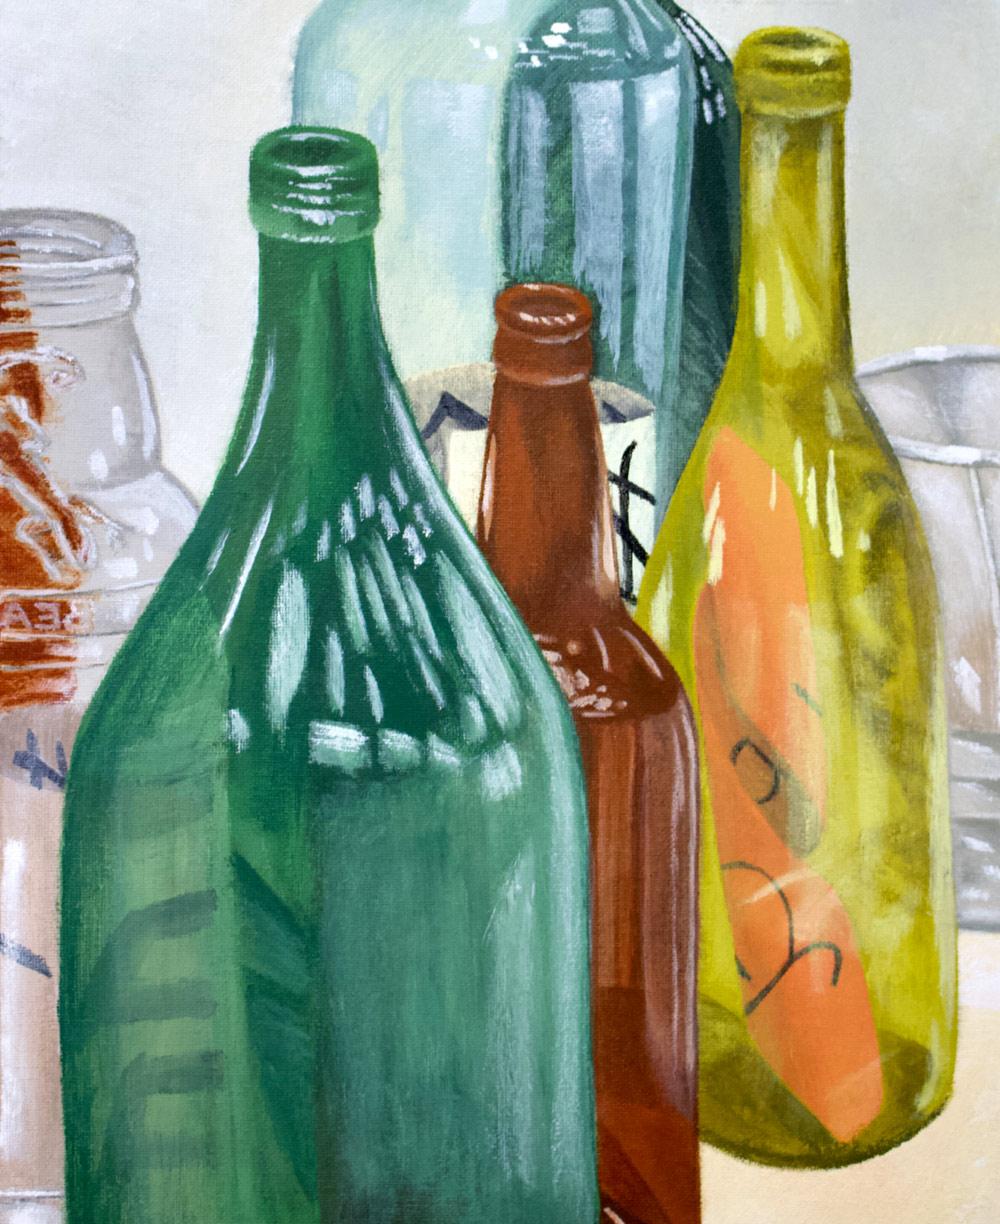 Painting of glass bottles.